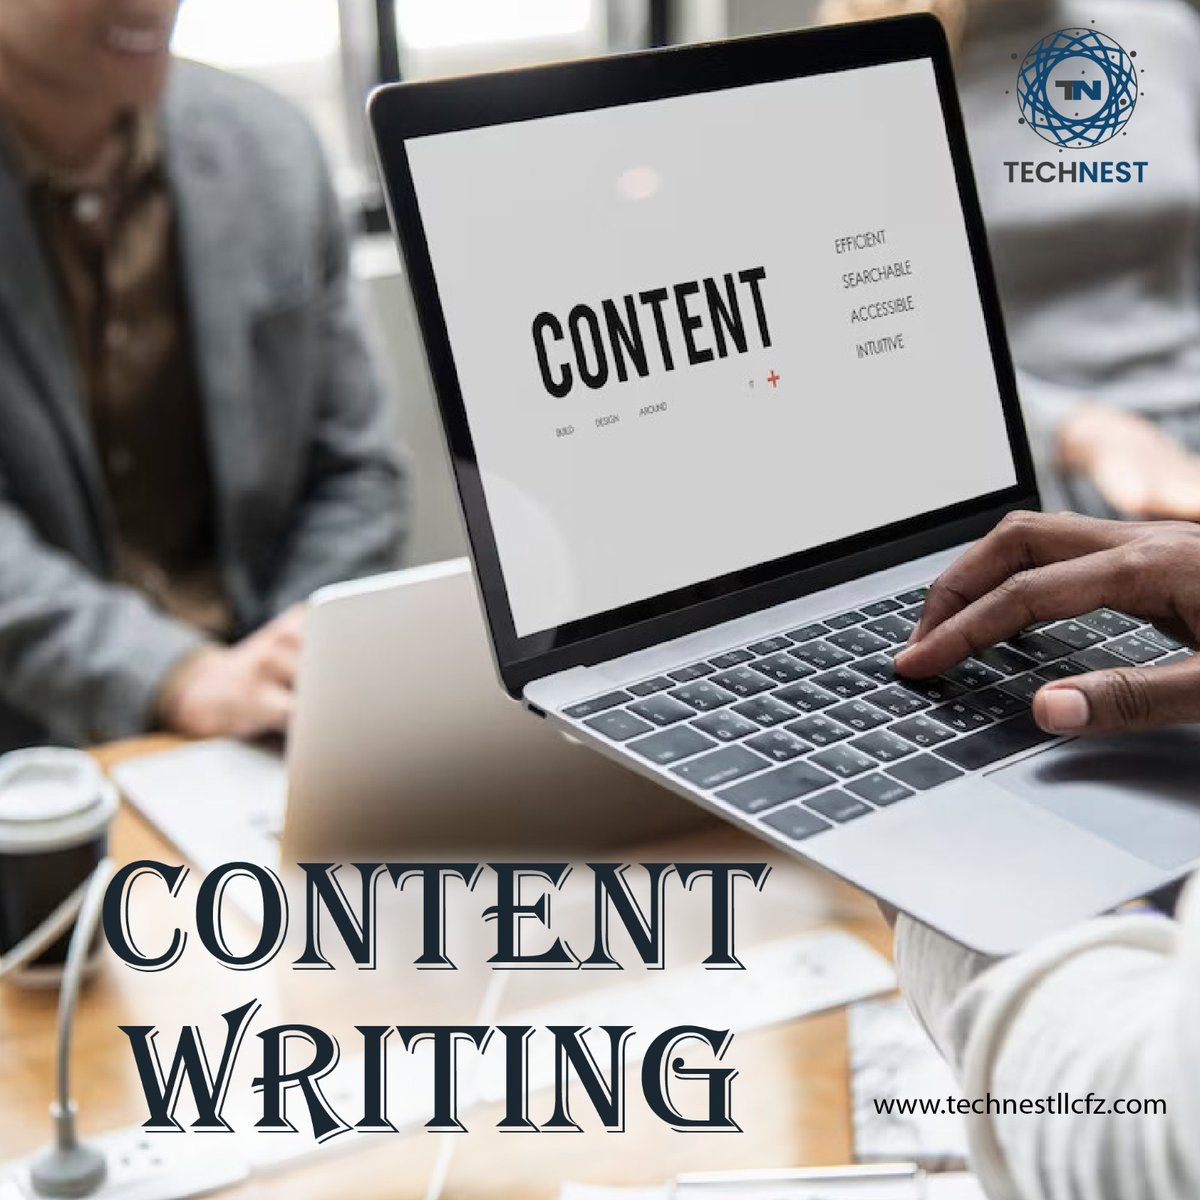 Words captivate, inspire, and persuade. Our content services connect deeply with your audience. Let's tell your story for a lasting impression. 🖋️✨
.
.
#contentwriting #technestllcfz #engagingcontent